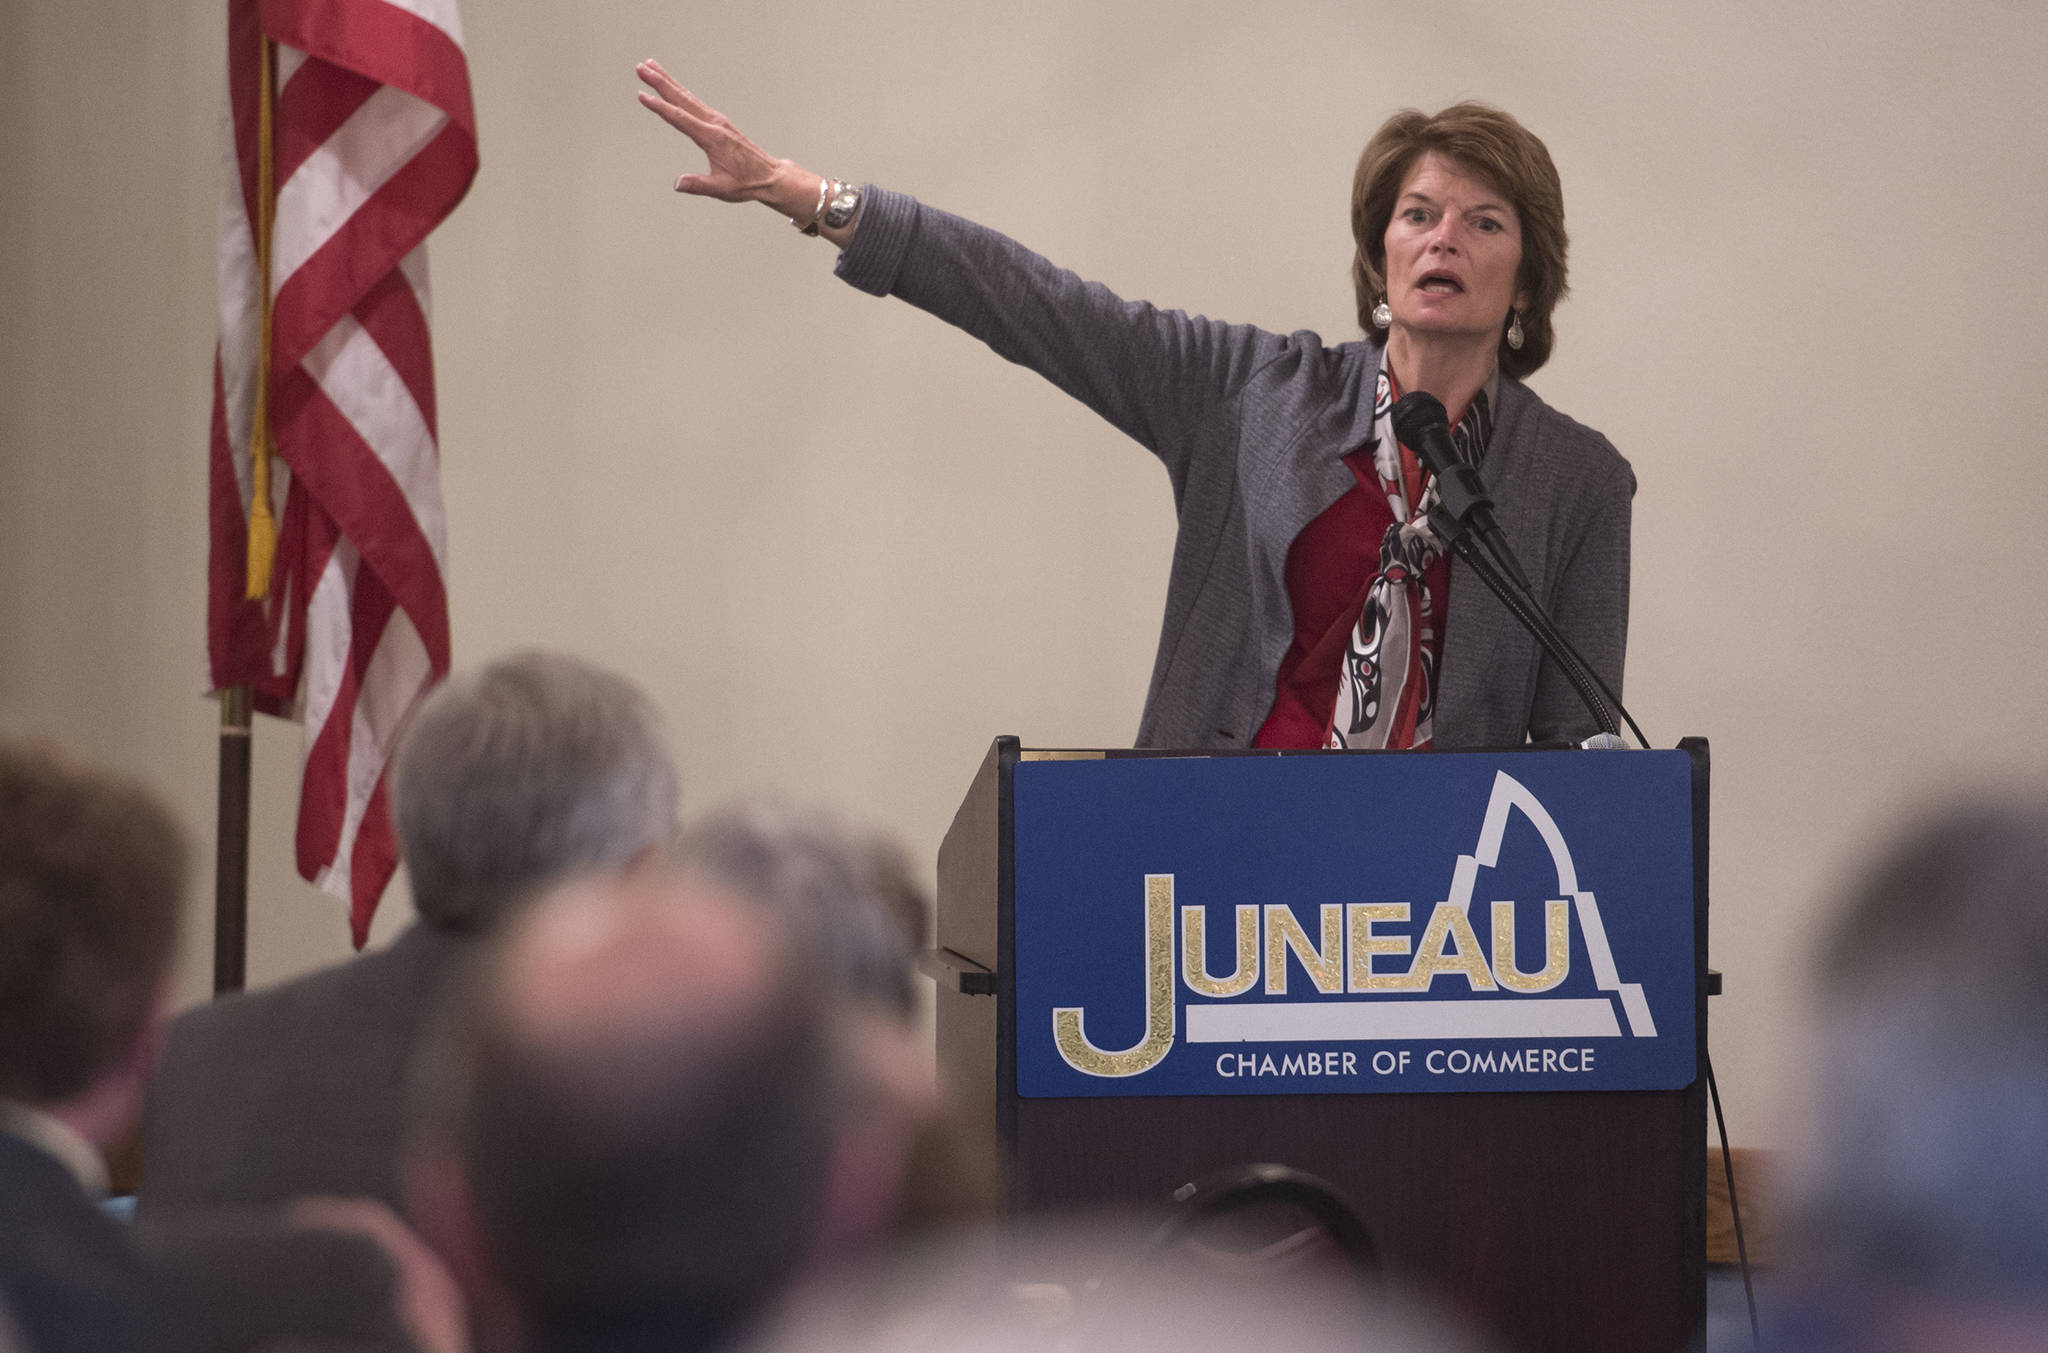 Alaska Sen. Lisa Murkowski speaks at the Juneau Chamber of Commerce’s weekly luncheon at the Moose Lodge on Thursday, June 1, 2017.